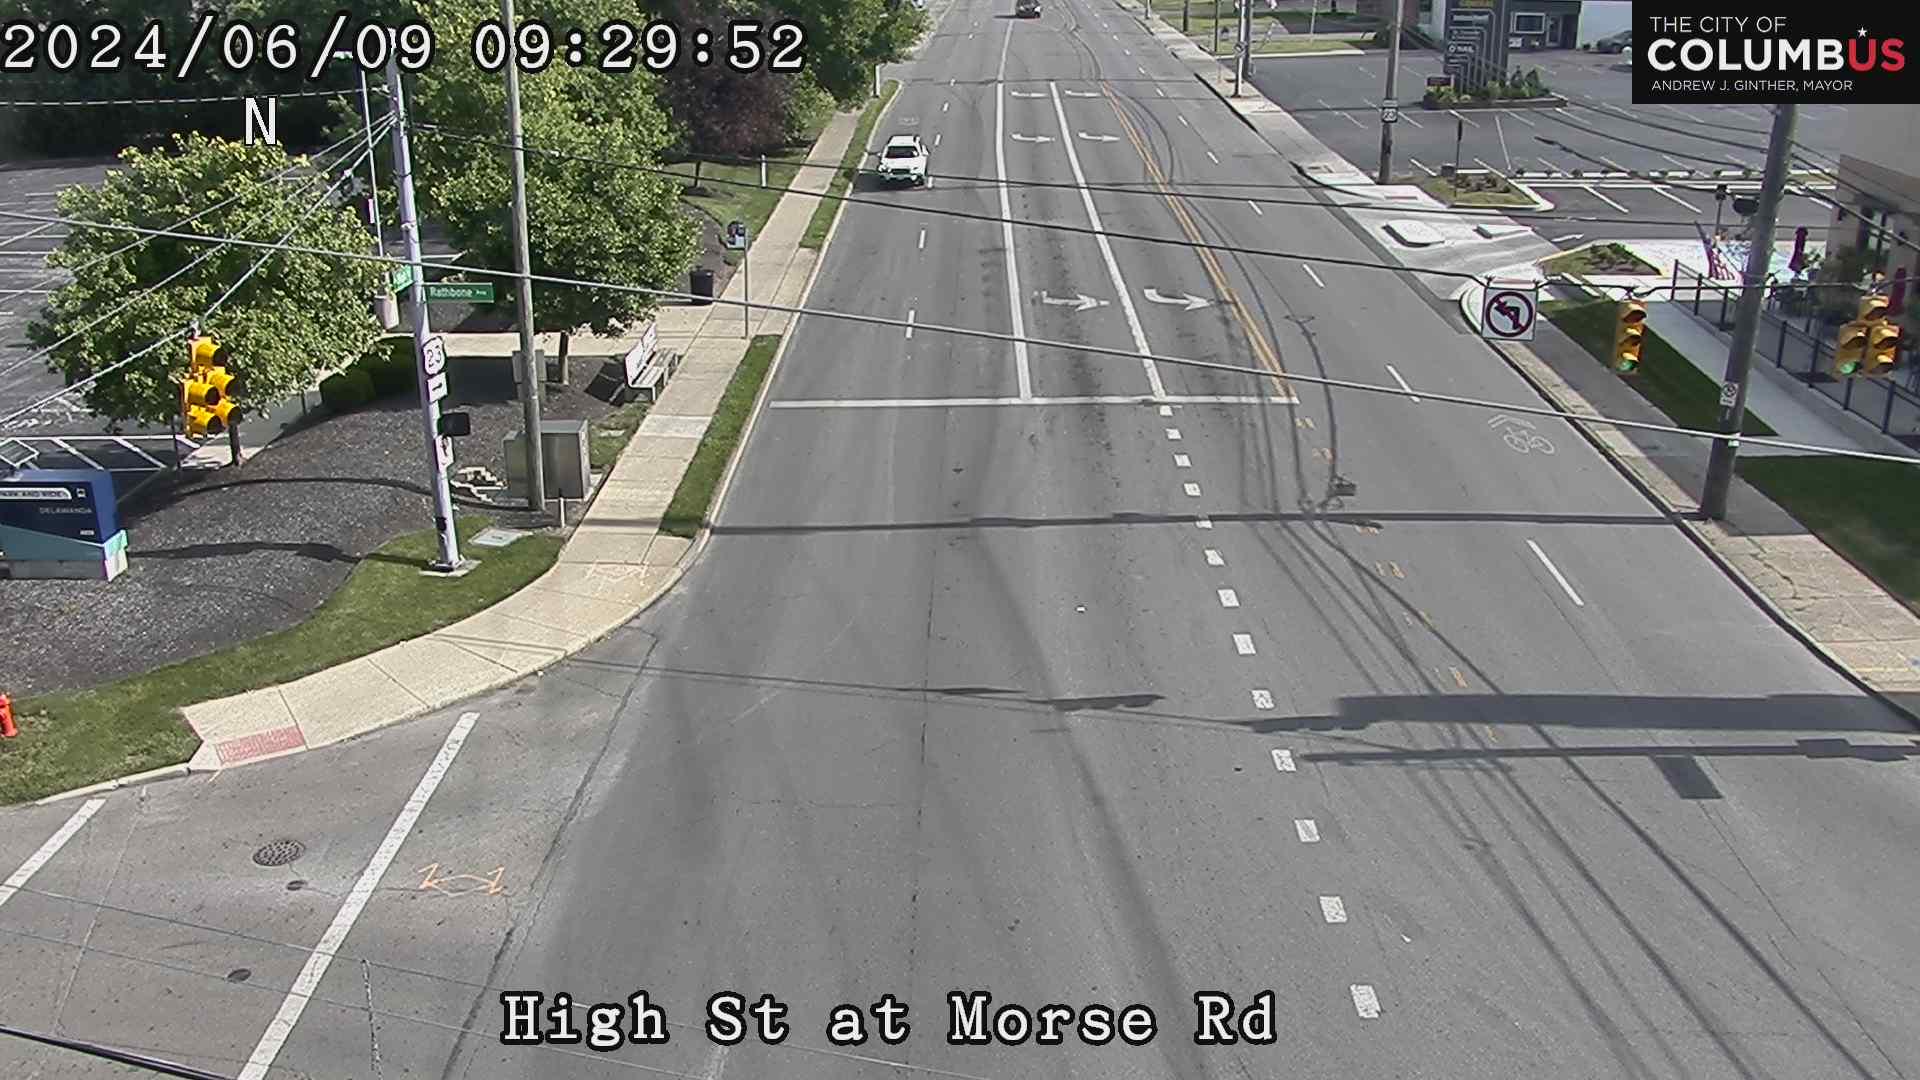 Traffic Cam Old Beechwold Historic District: City of Columbus) High St at Morse Rd